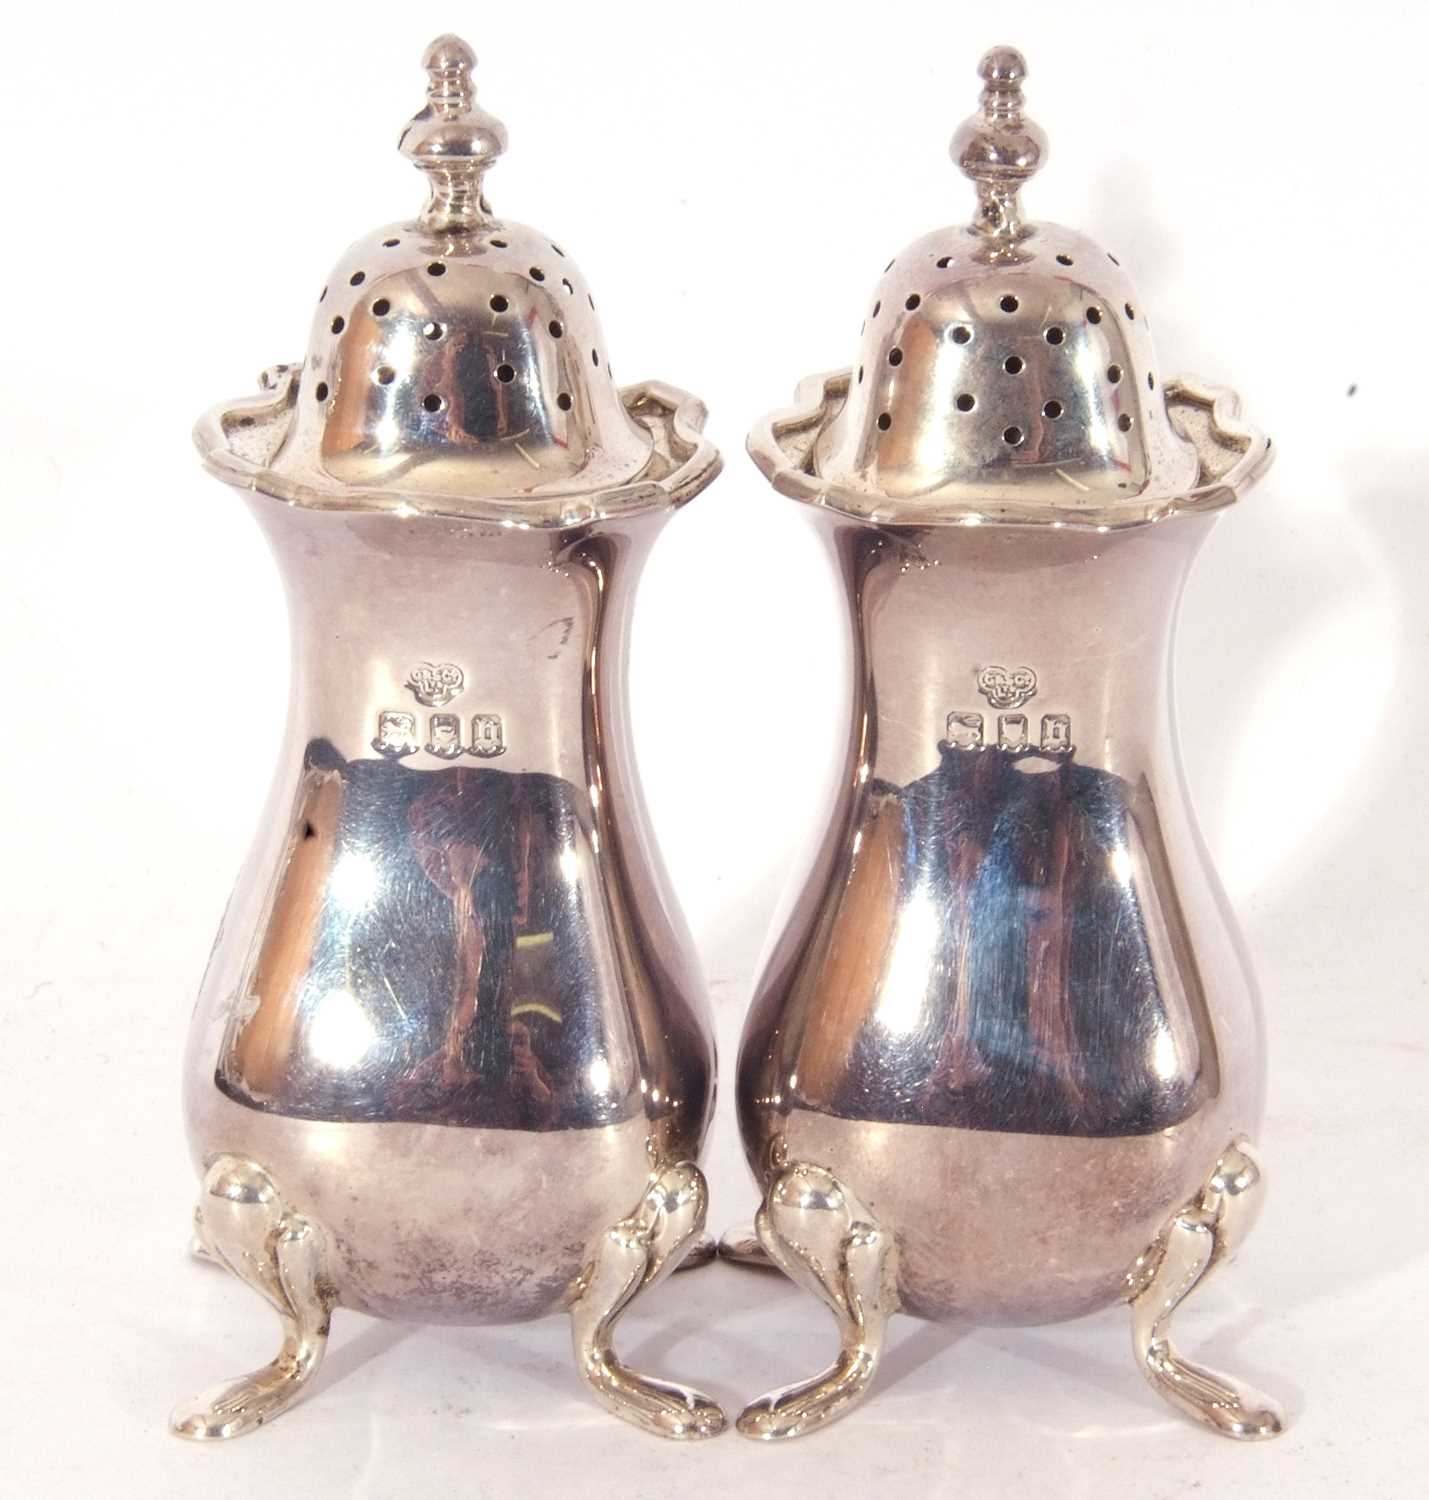 Pair of George V heavy gauge baluster casters with card cut rims, urn finials and each supported